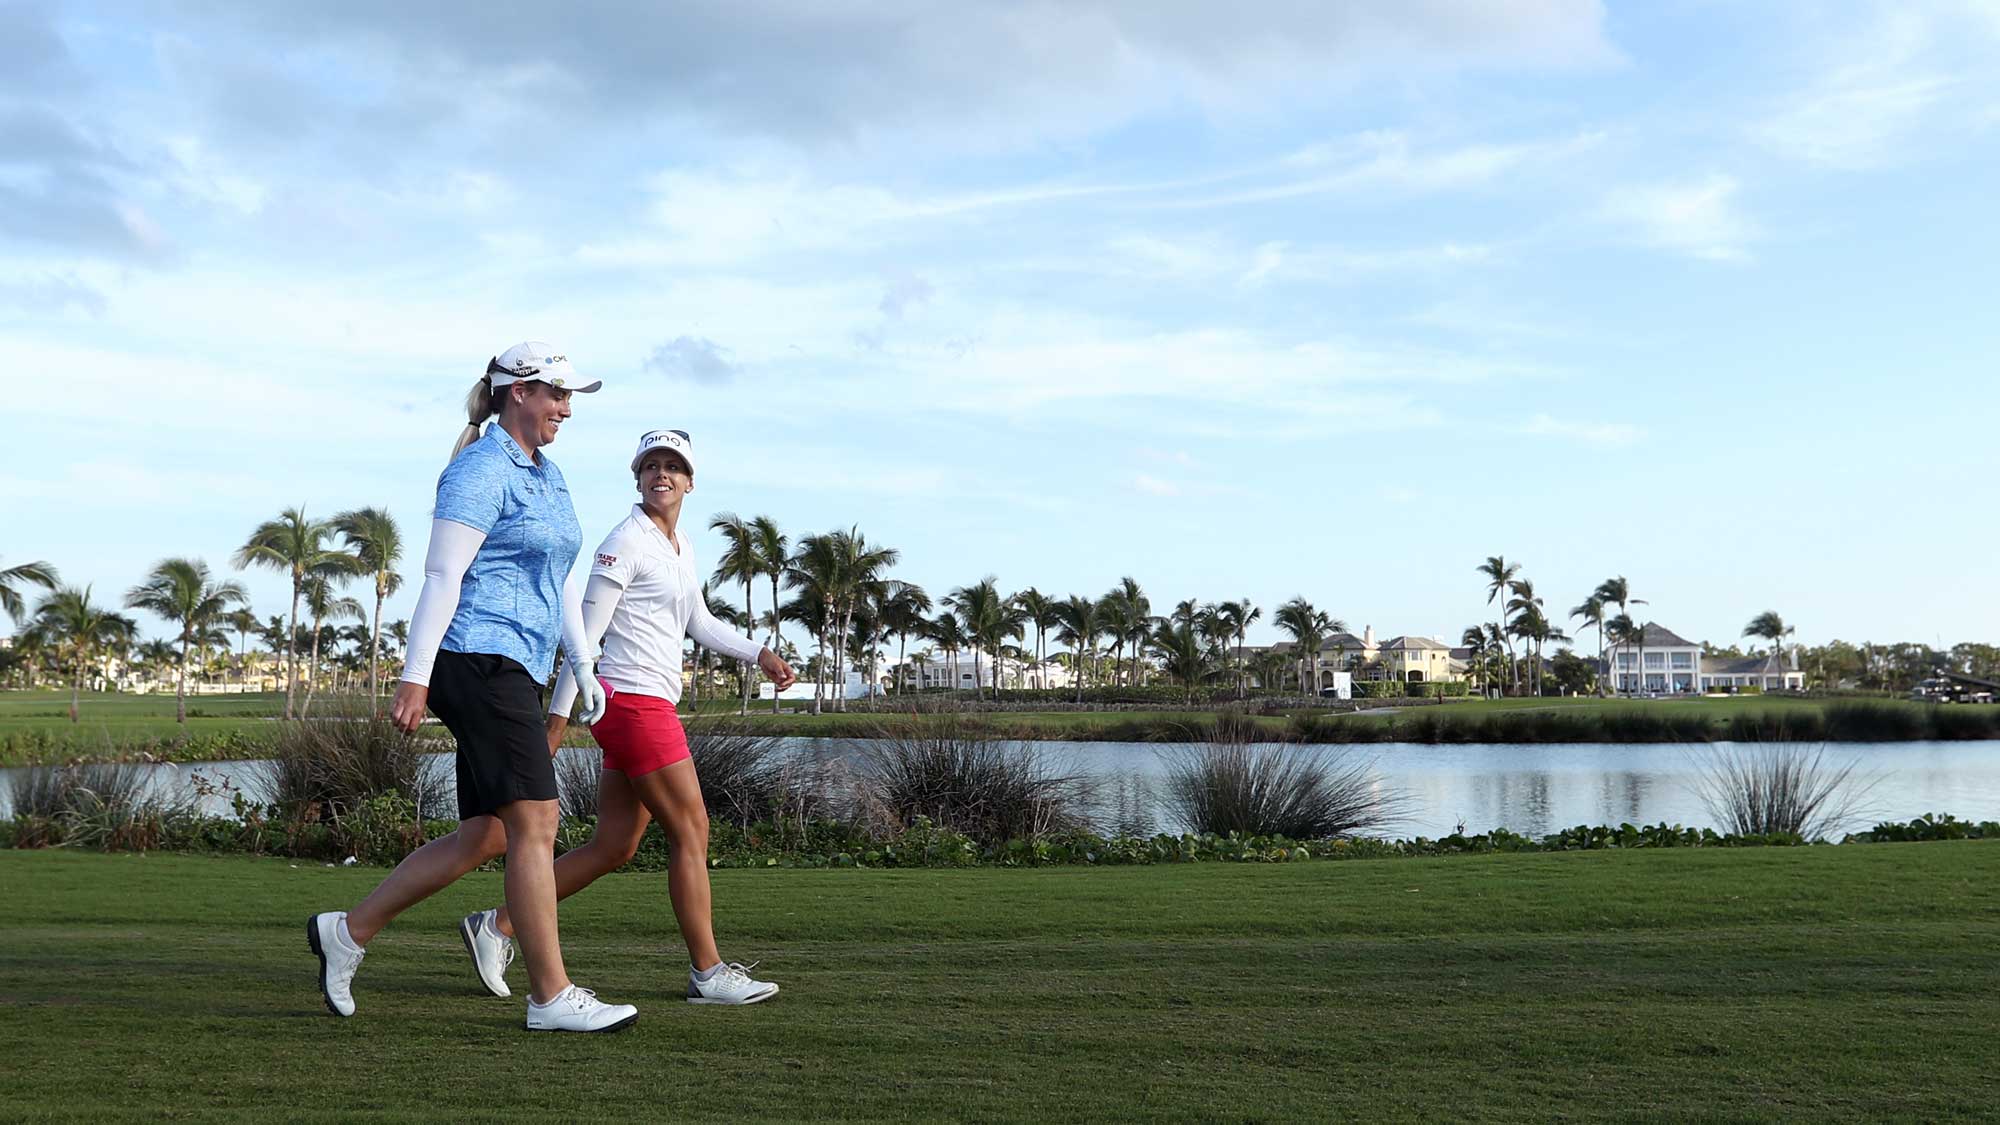 Brittany Lincicome of the United States and Pernilla Lindberg of Sweden walk on nine fairway during round two of the Pure Silk Bahamas LPGA Classic